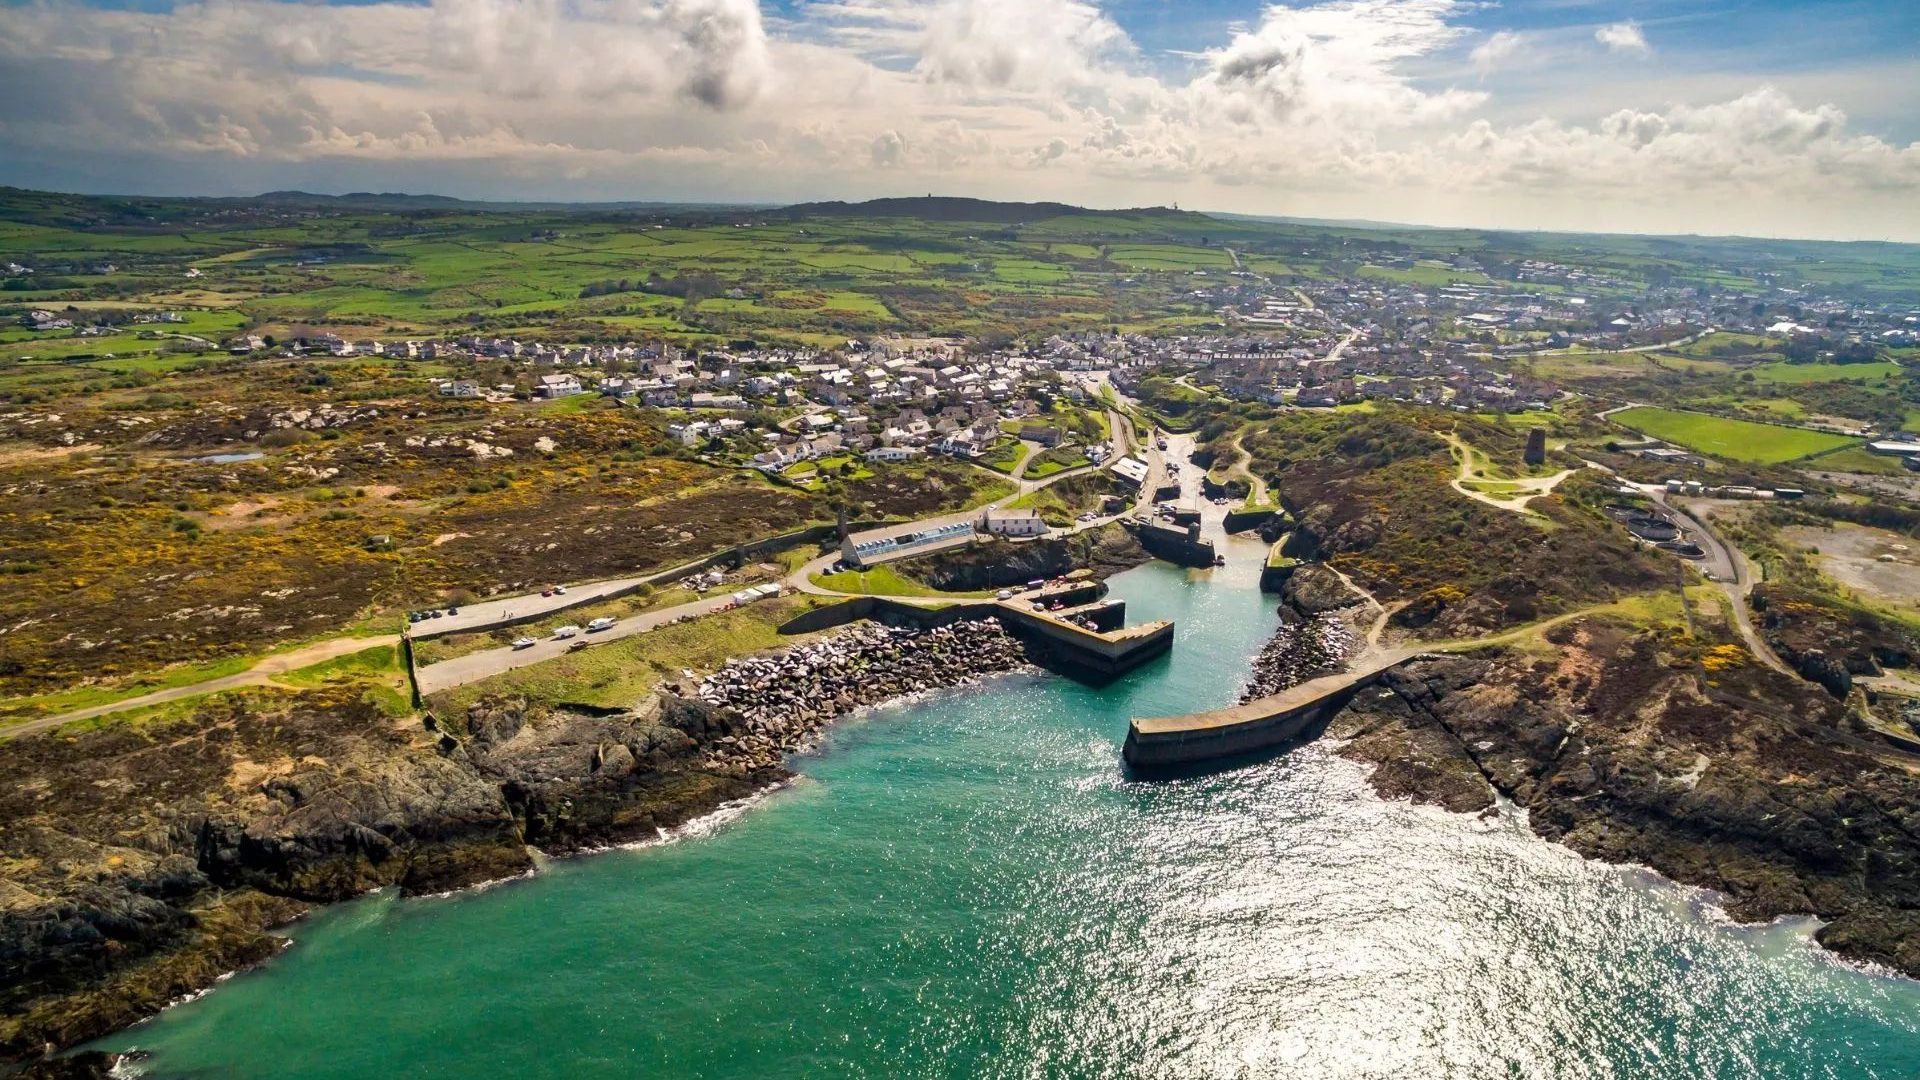 Aerial view of Amlwch Harbour on Anglesey, North Wales, UK